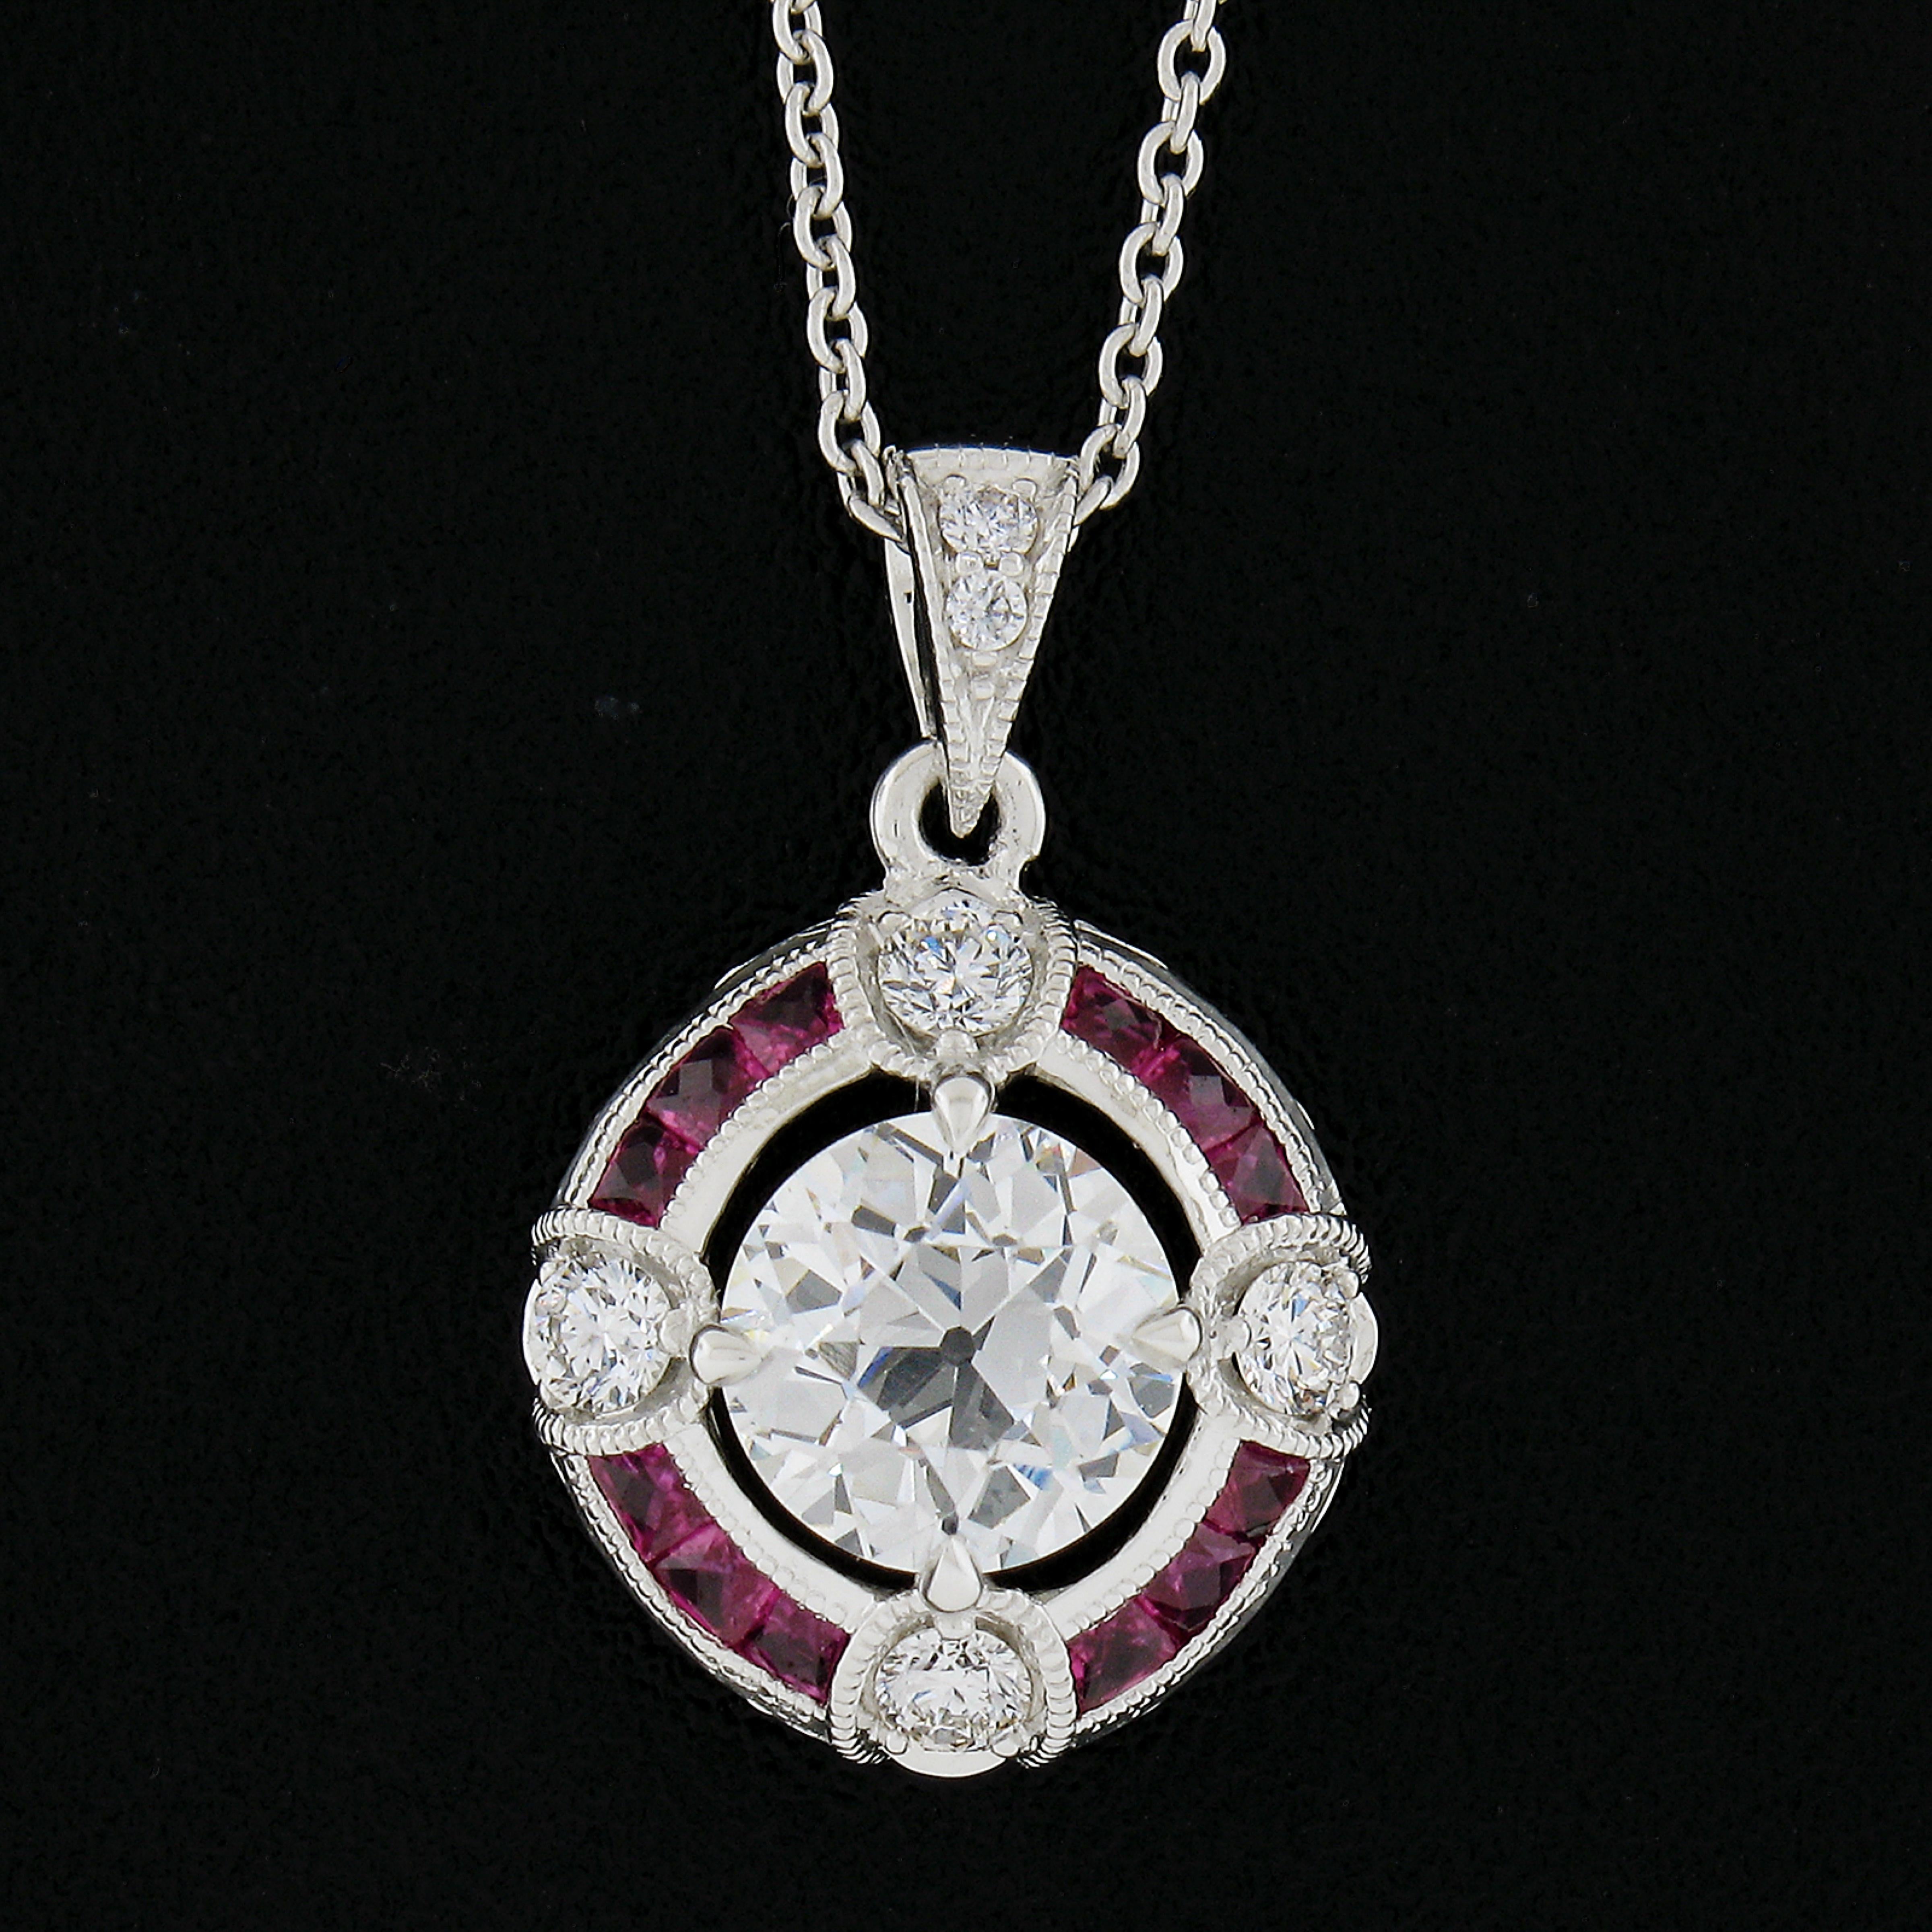 French Cut Antique 14k White Gold Gia Old Diamond W/ Ruby Target Pendant on New 18